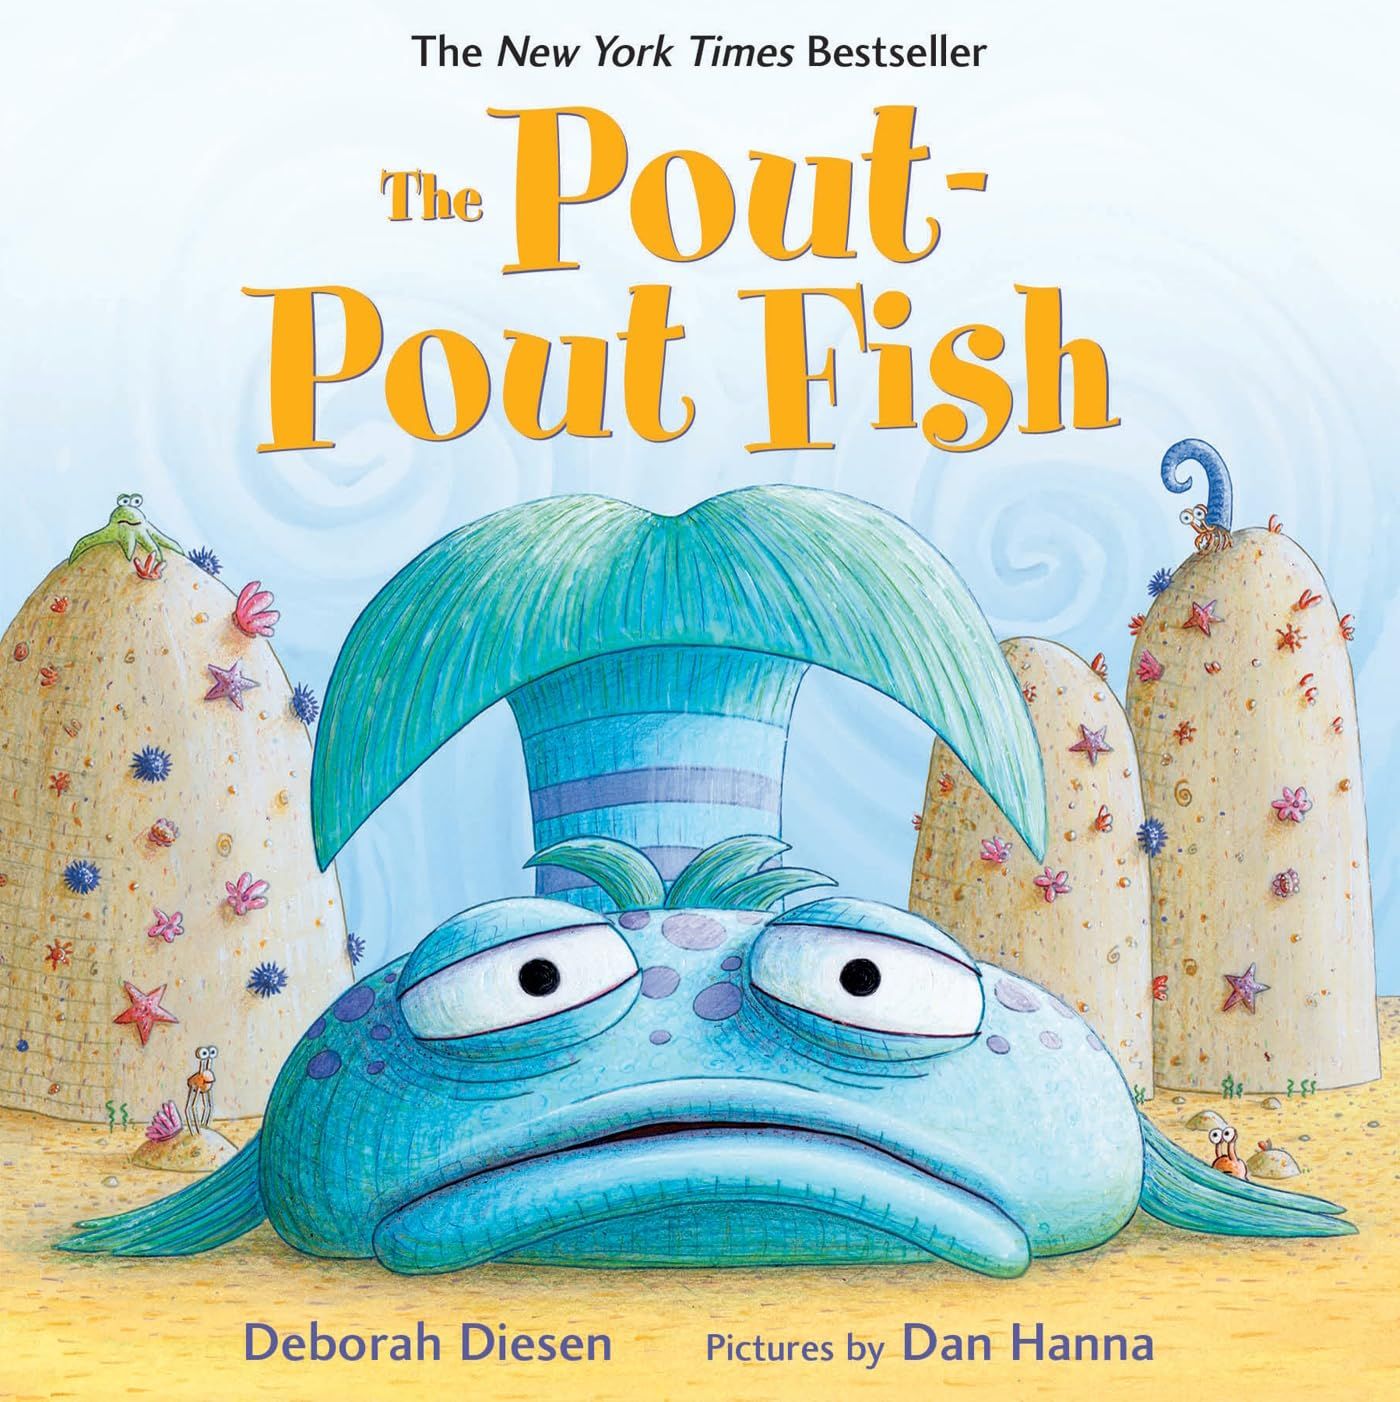 <p><strong>$4.98</strong></p><p>Come for that fish's grin-inducing pout, stay for the lesson about feelings. It's perfect for introducing toddlers to how emotions can impact others. </p>